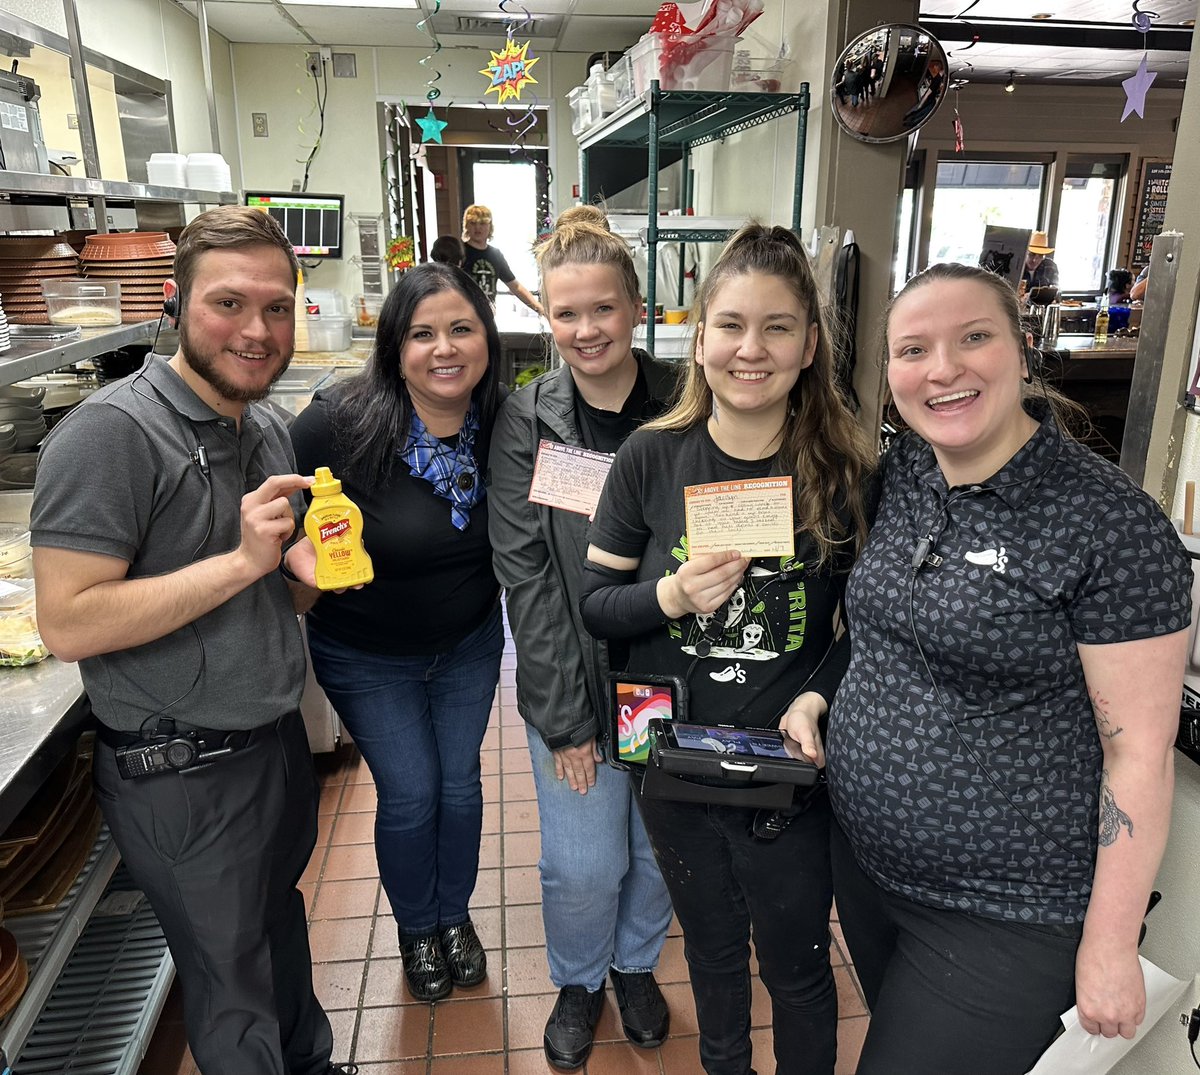 A lovely lunch visit from our DO Lisa with some ATLs to celebrate! Allie got recognized for amazing service and always taking care of guests and Jasslyn got recognized for helping close lunch and working her 2nd degree! @wherry_lisa @cassidyhuska @sarahjunco #ChilisLove